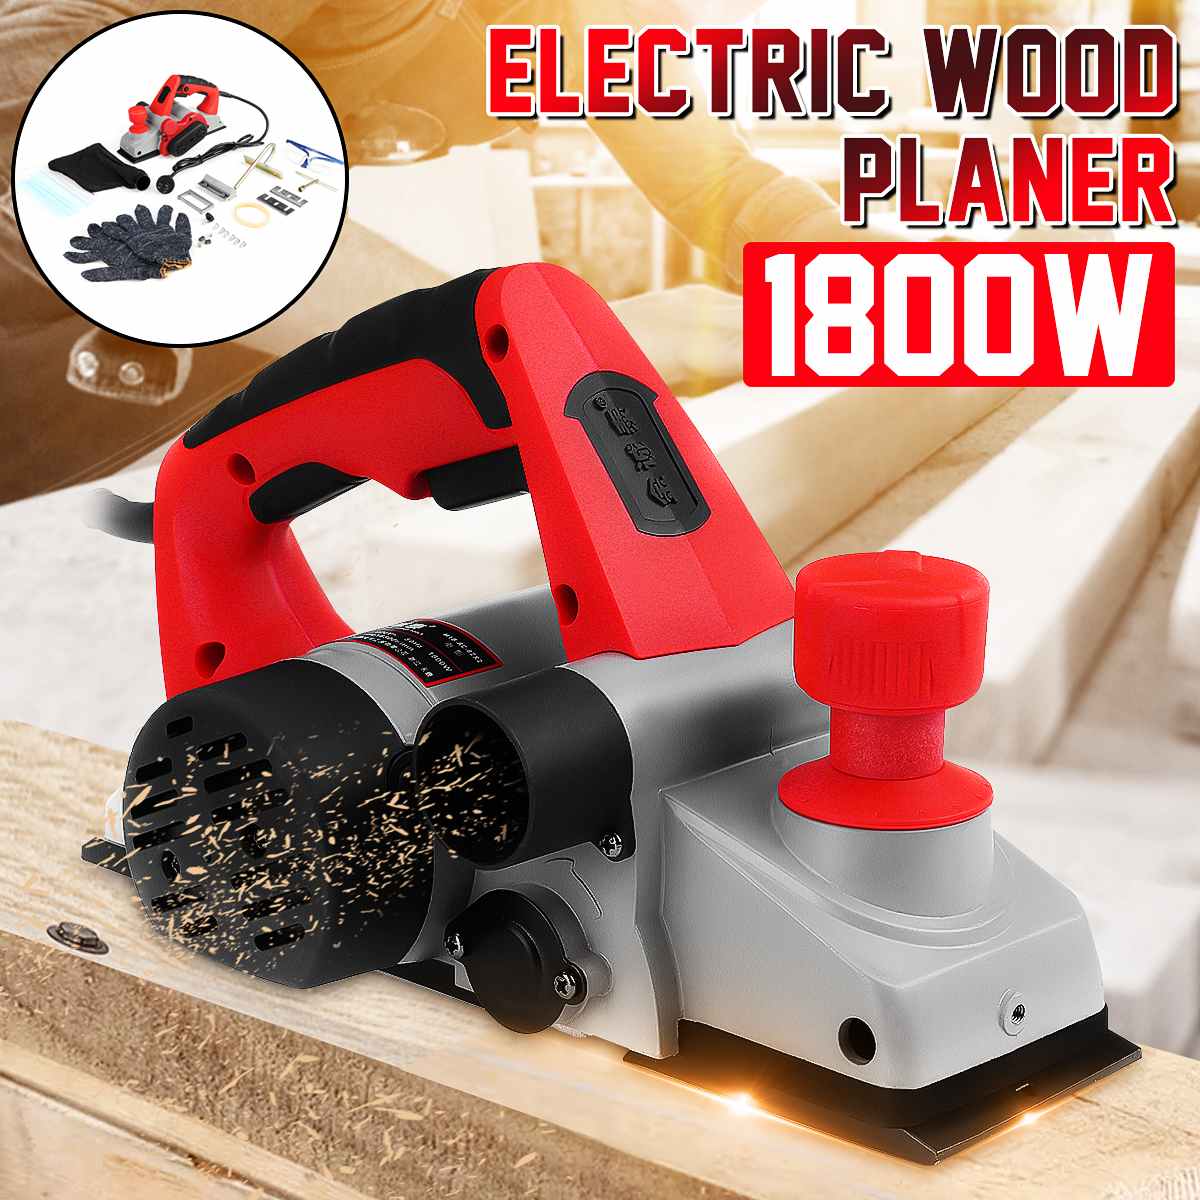 Drillrpo 1200W/1600W/1800W Electric Planer Powerful Multifunctional Wood Planer HandHeld Copper Wire Carpenter Woodworking DIY